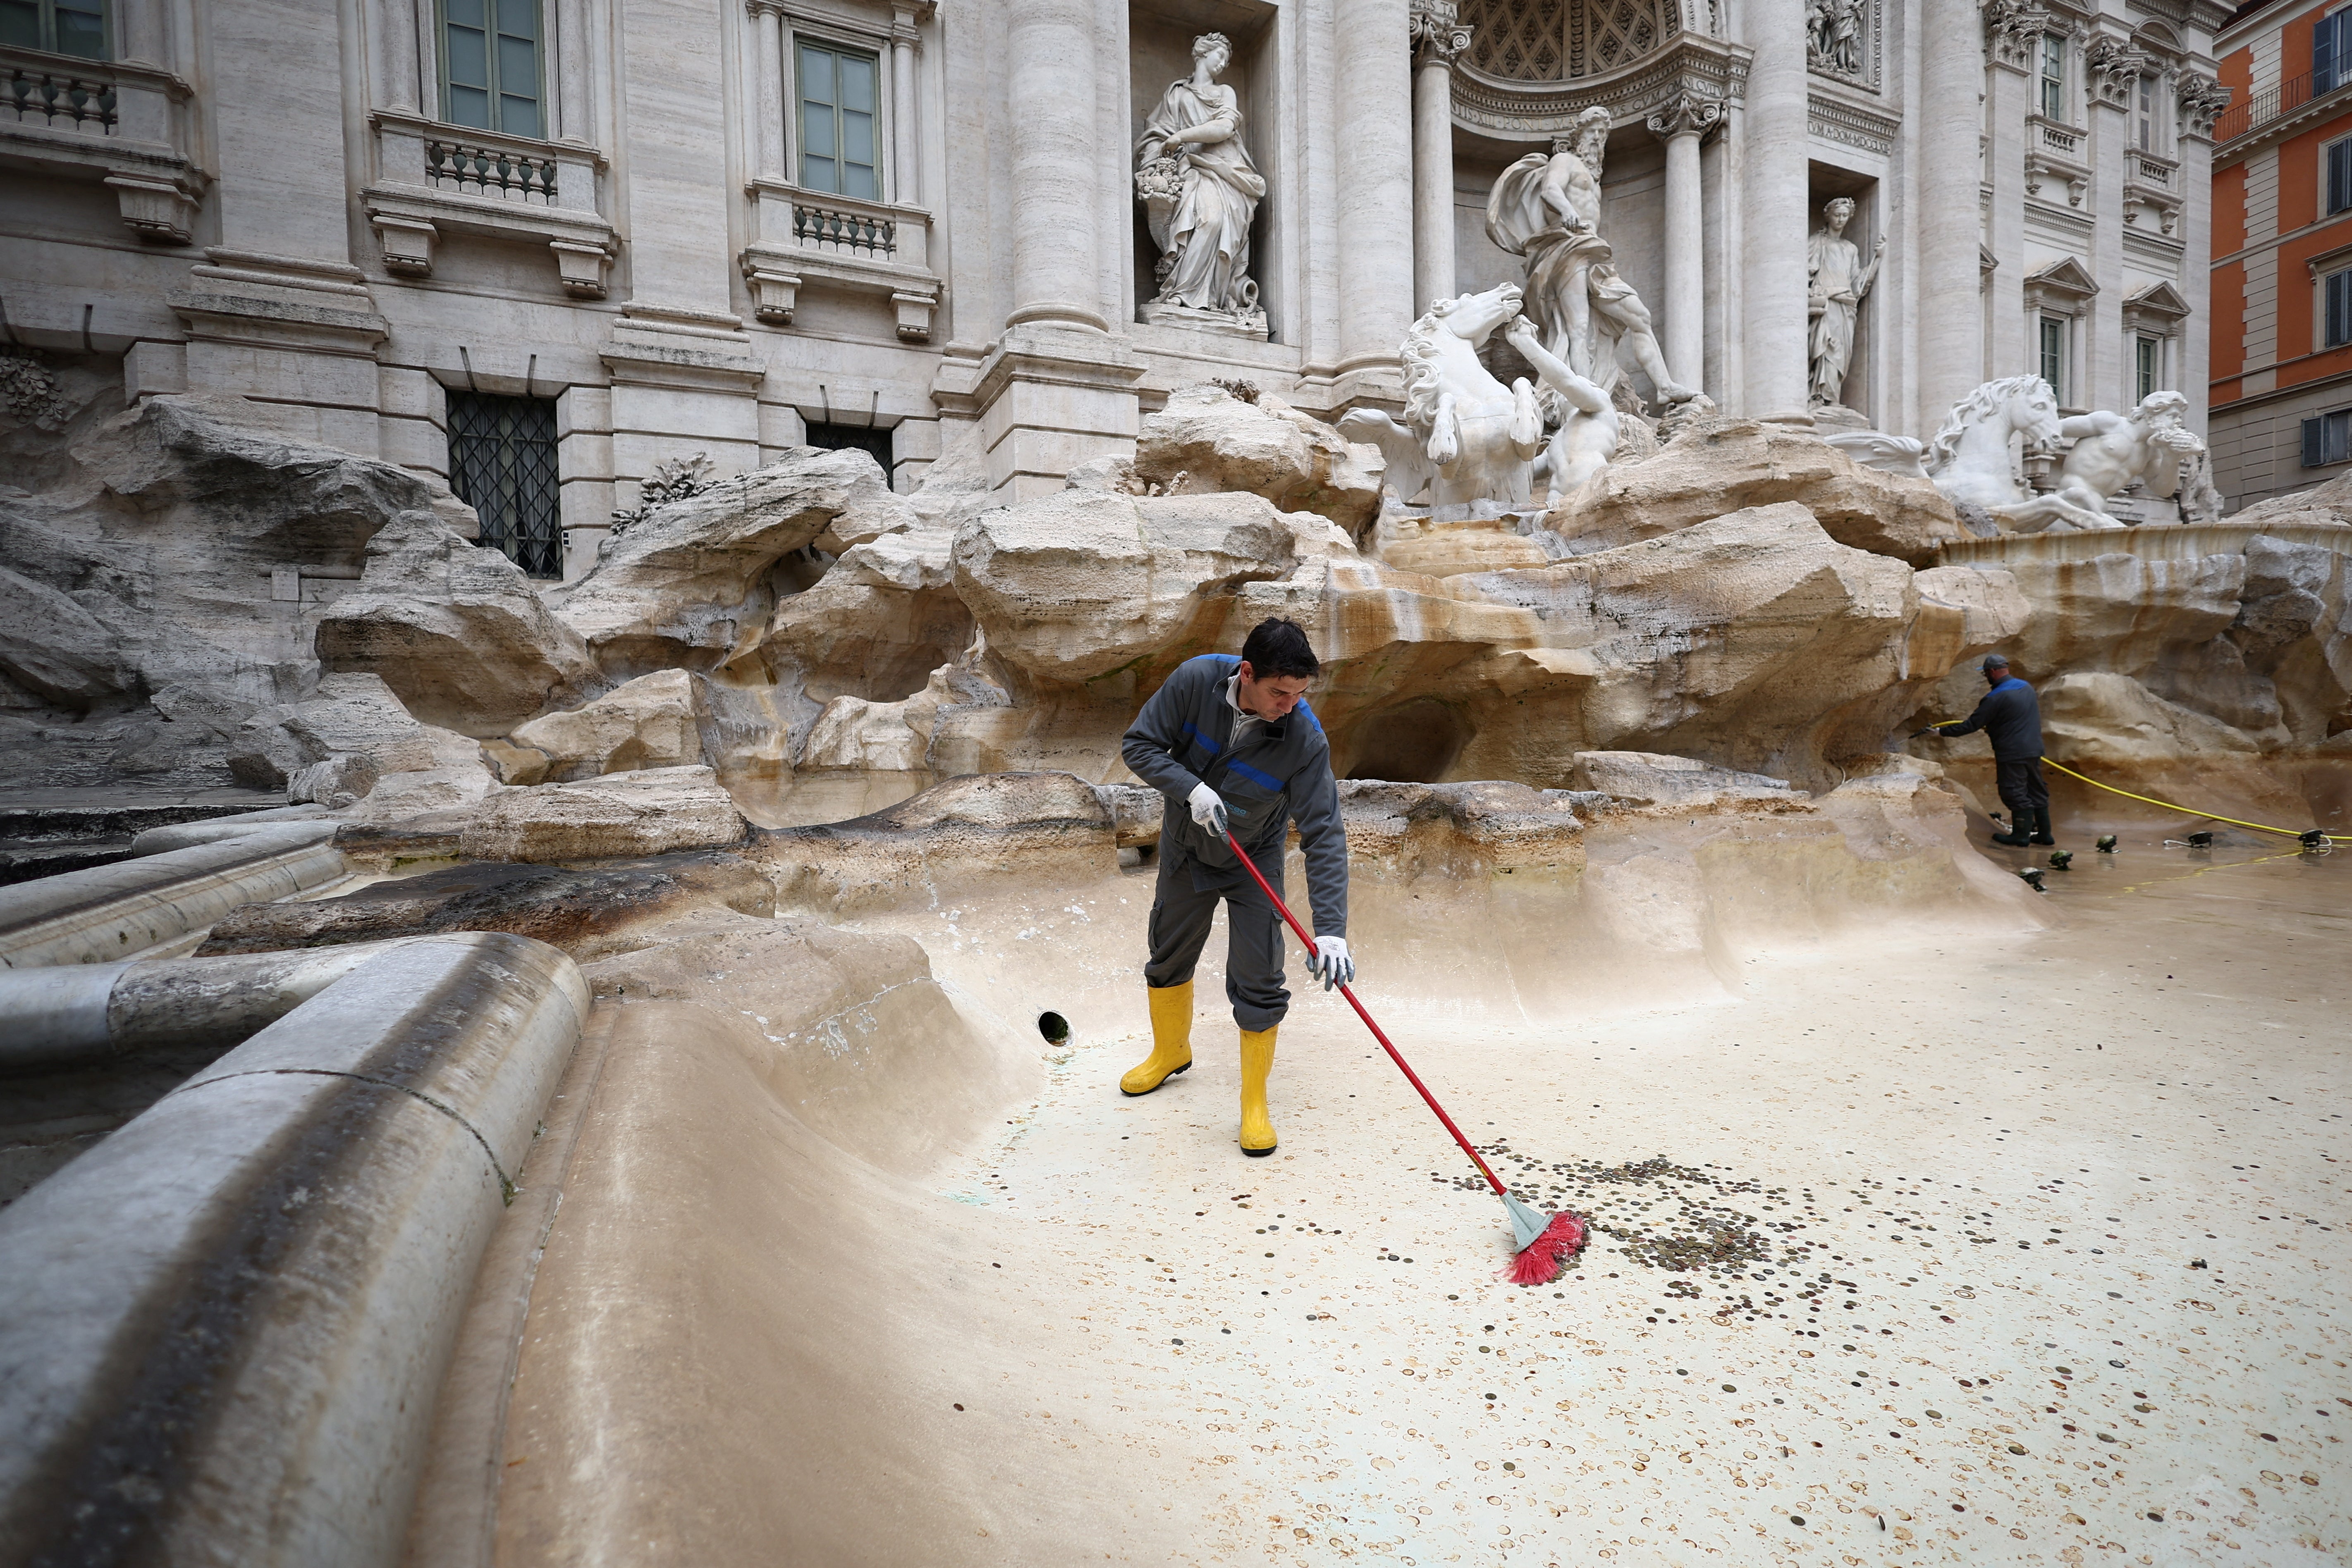 ACEA utility worker Alexio Cola uses a broom to gather coins to be collected in the emptied Trevi Fountain in Rome